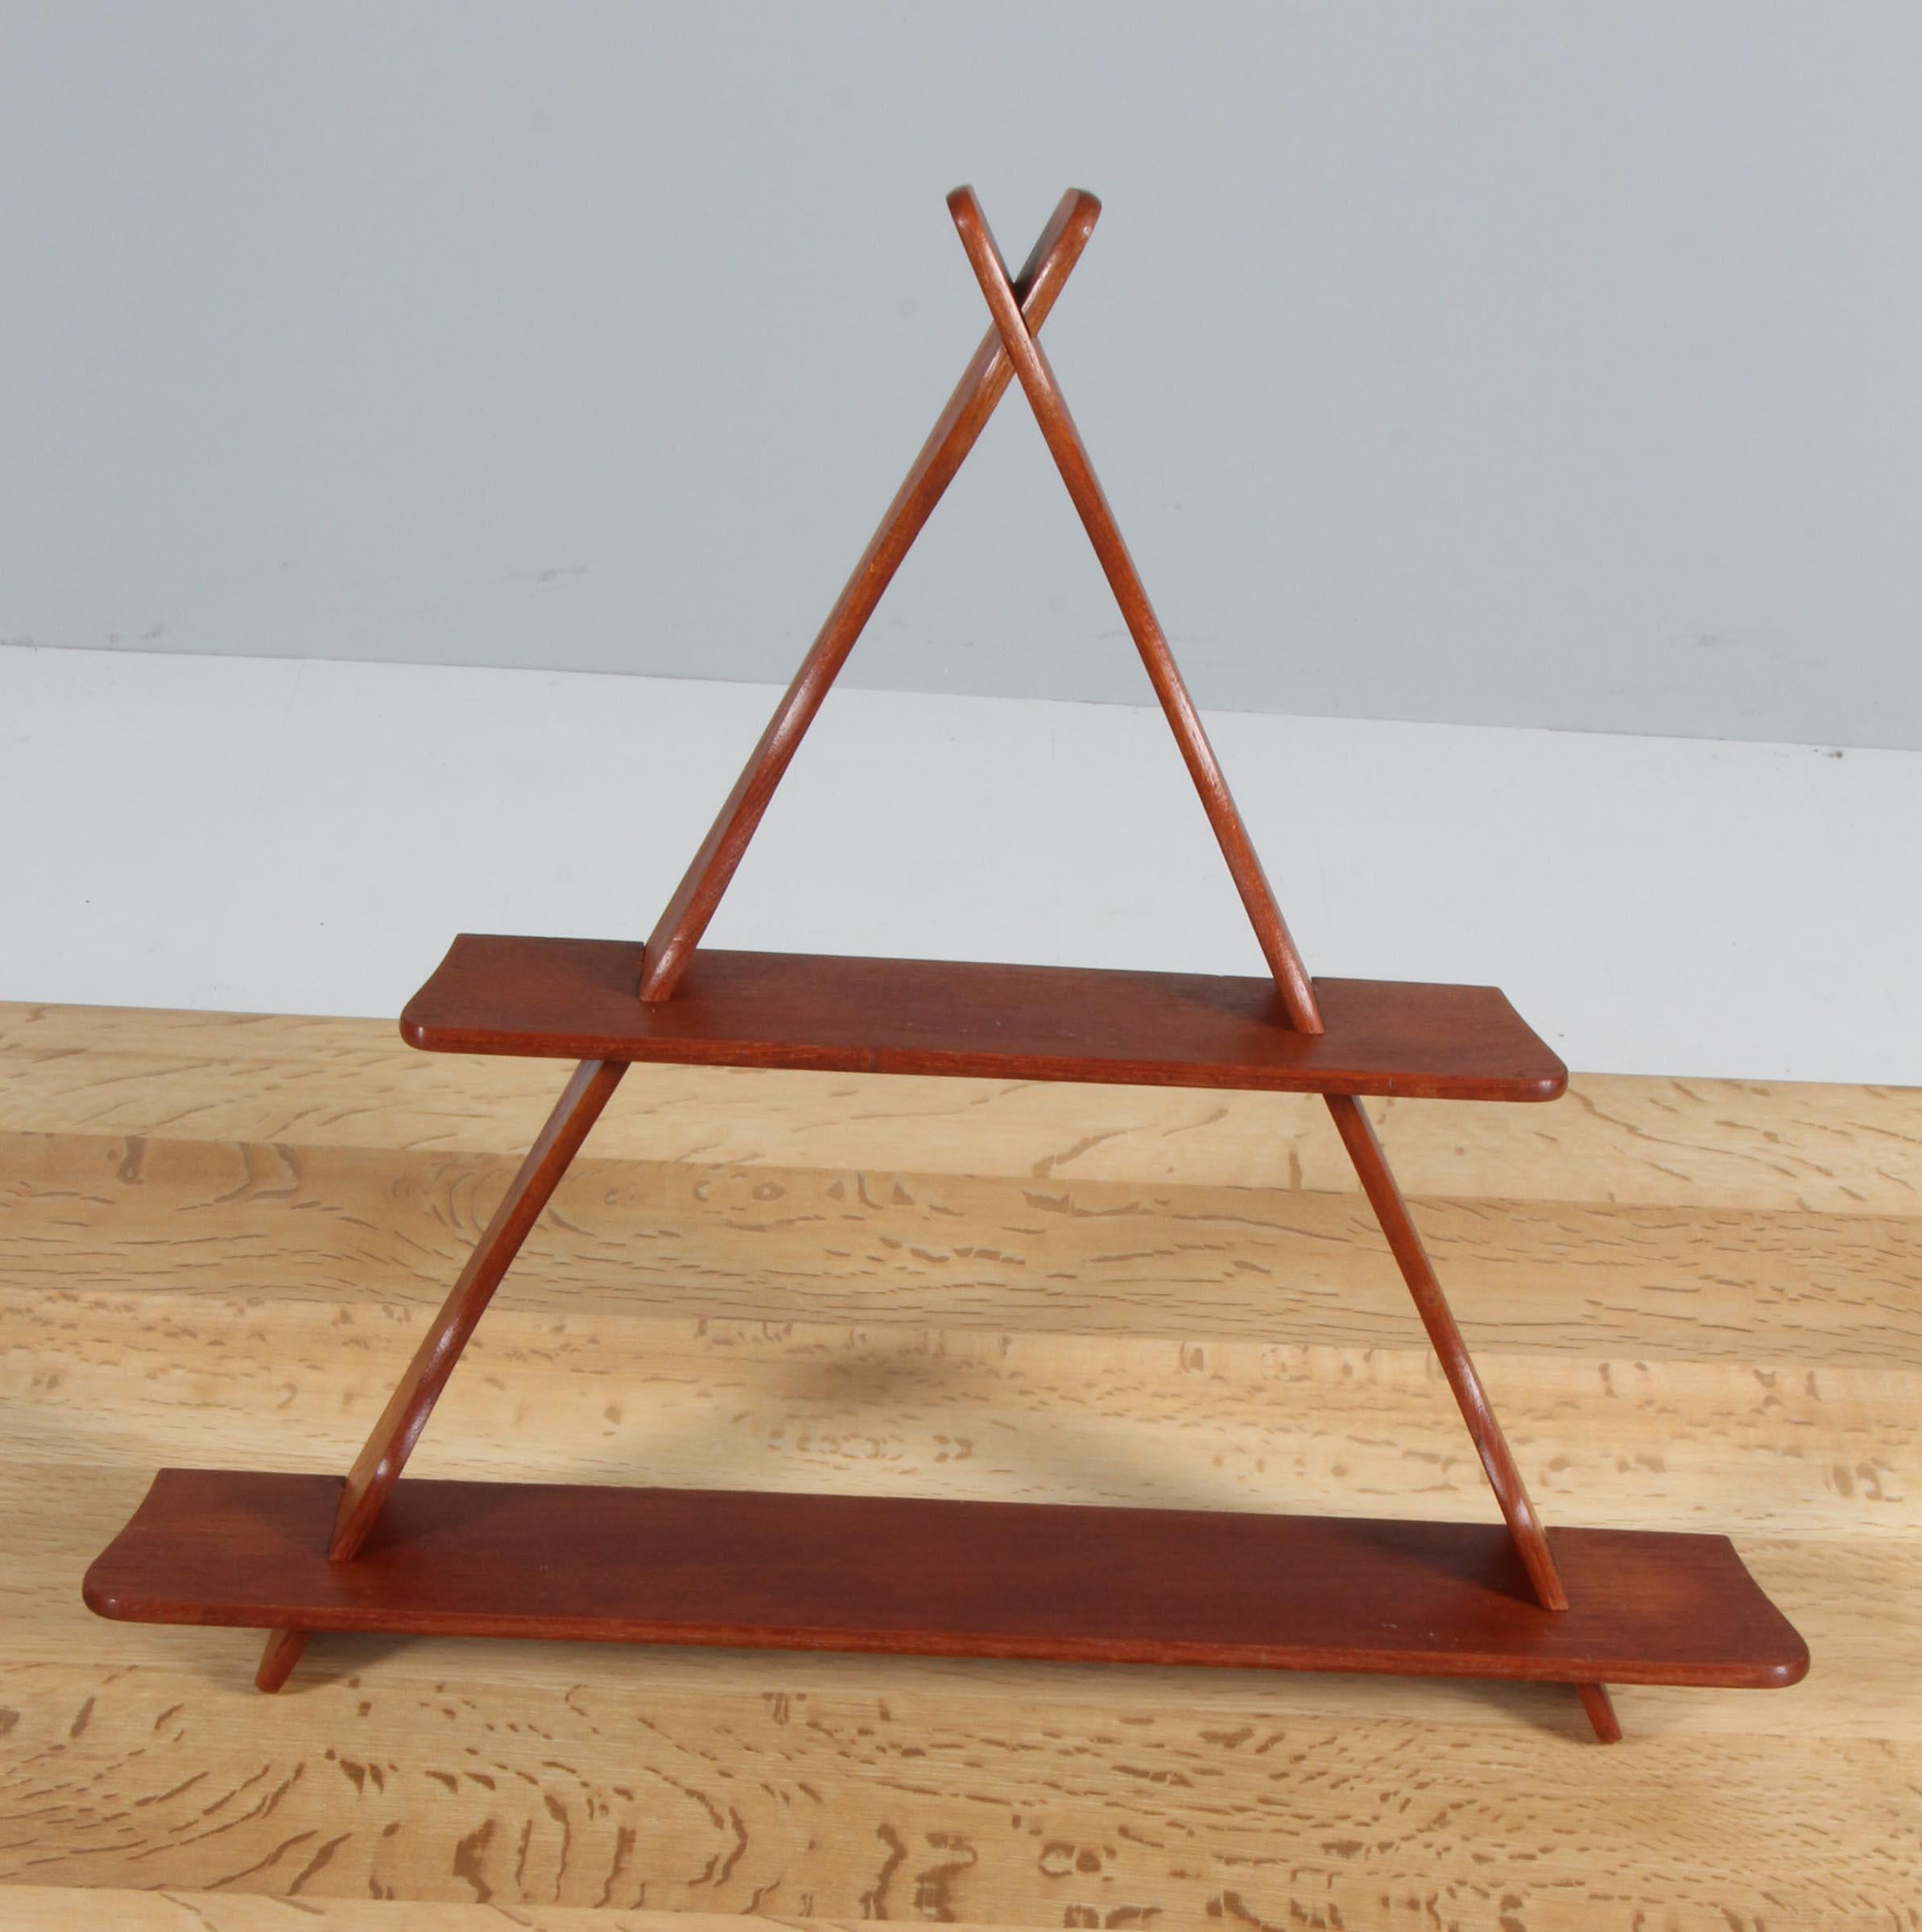 Small triangular wall shelf in solid teak. Assembled without the use of metal. It can be disassembled and assembled again within minutes. It features beautiful organically shaped and hand-finished profiles. This design is attributed to the most